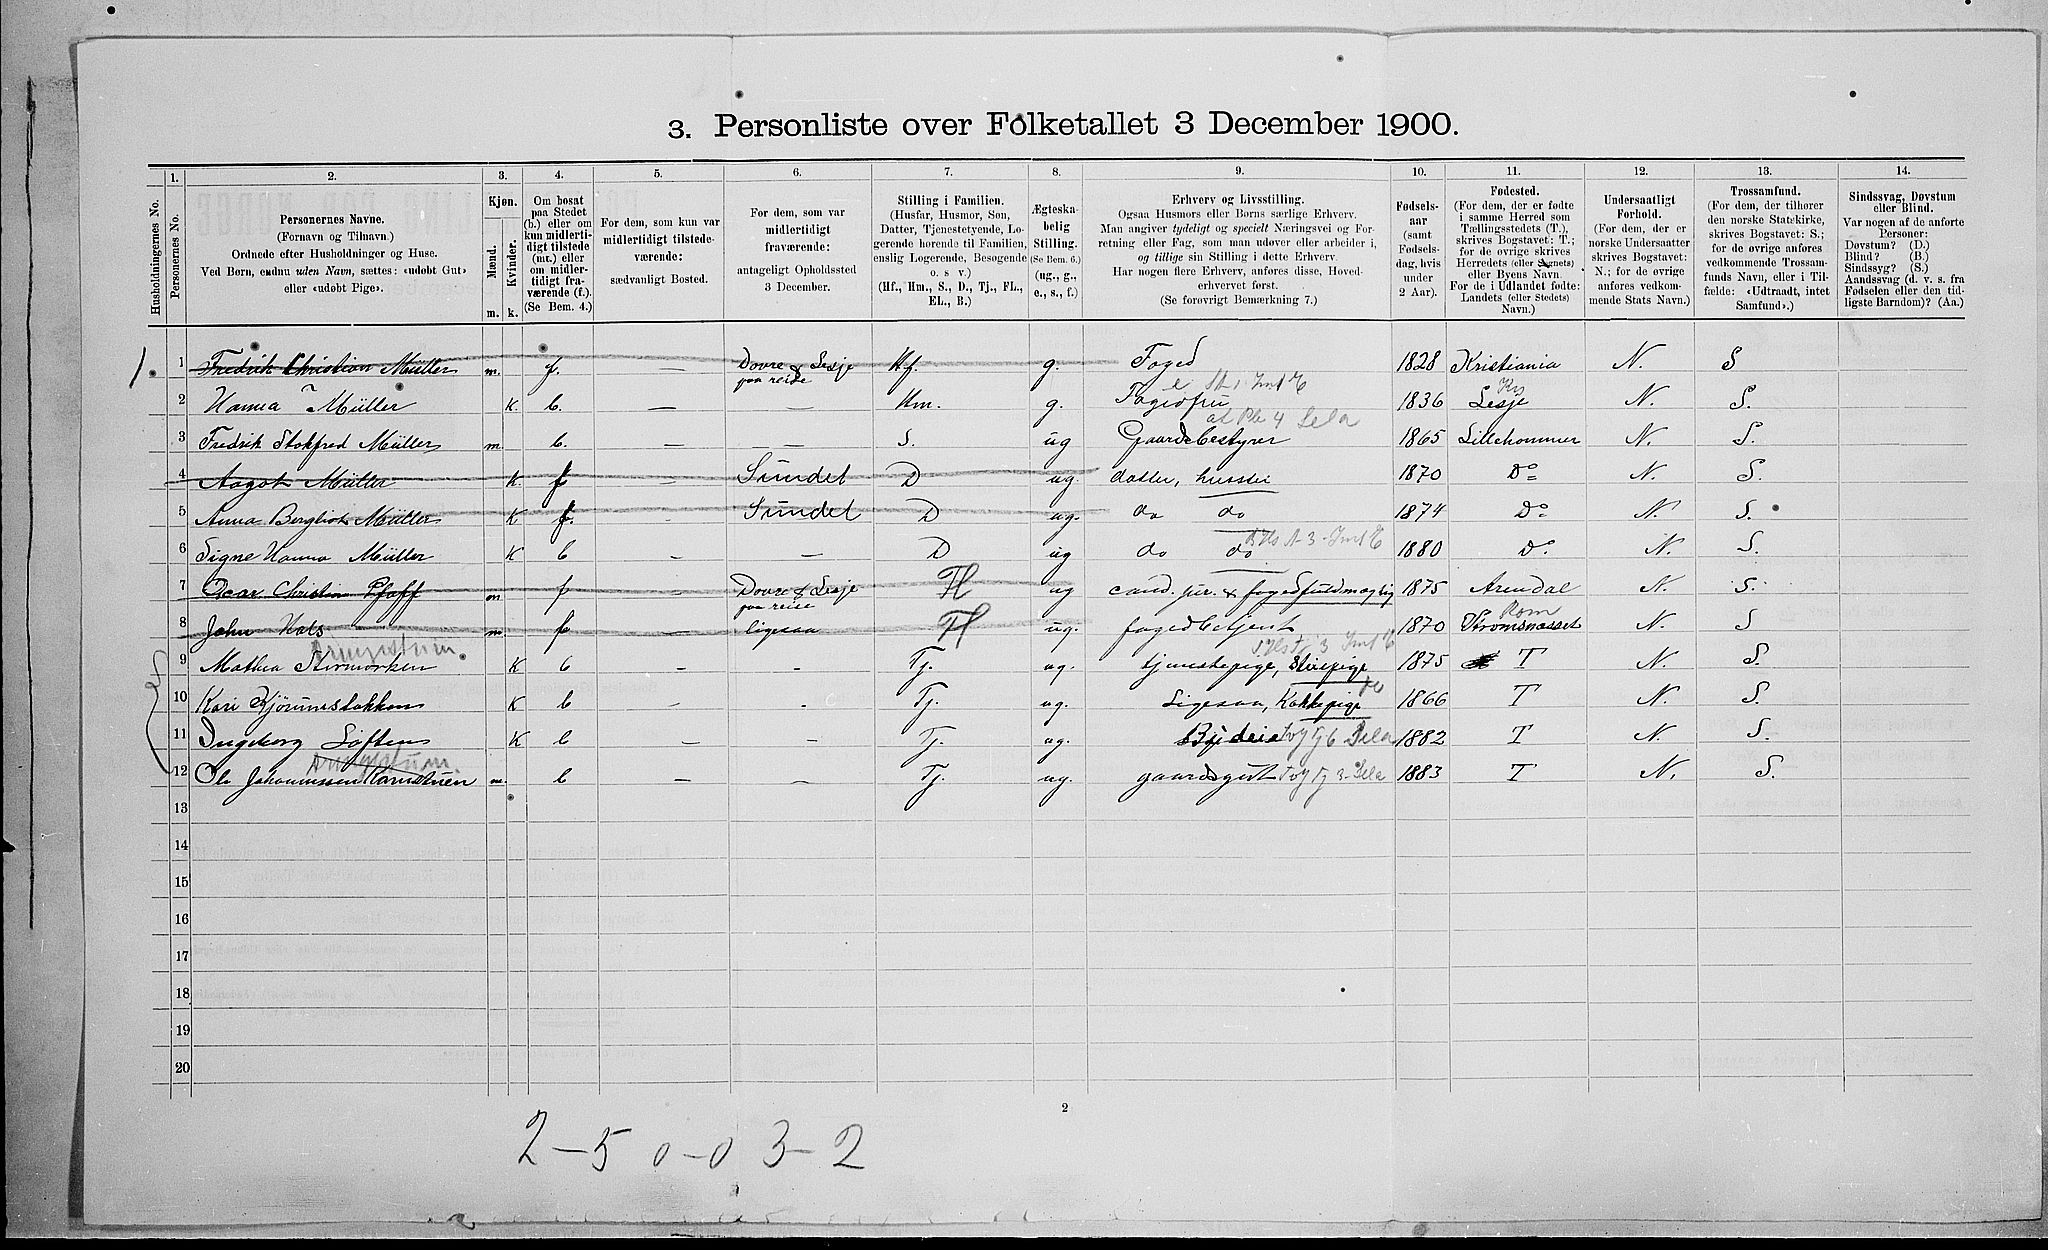 SAH, 1900 census for Nord-Fron, 1900, p. 1090